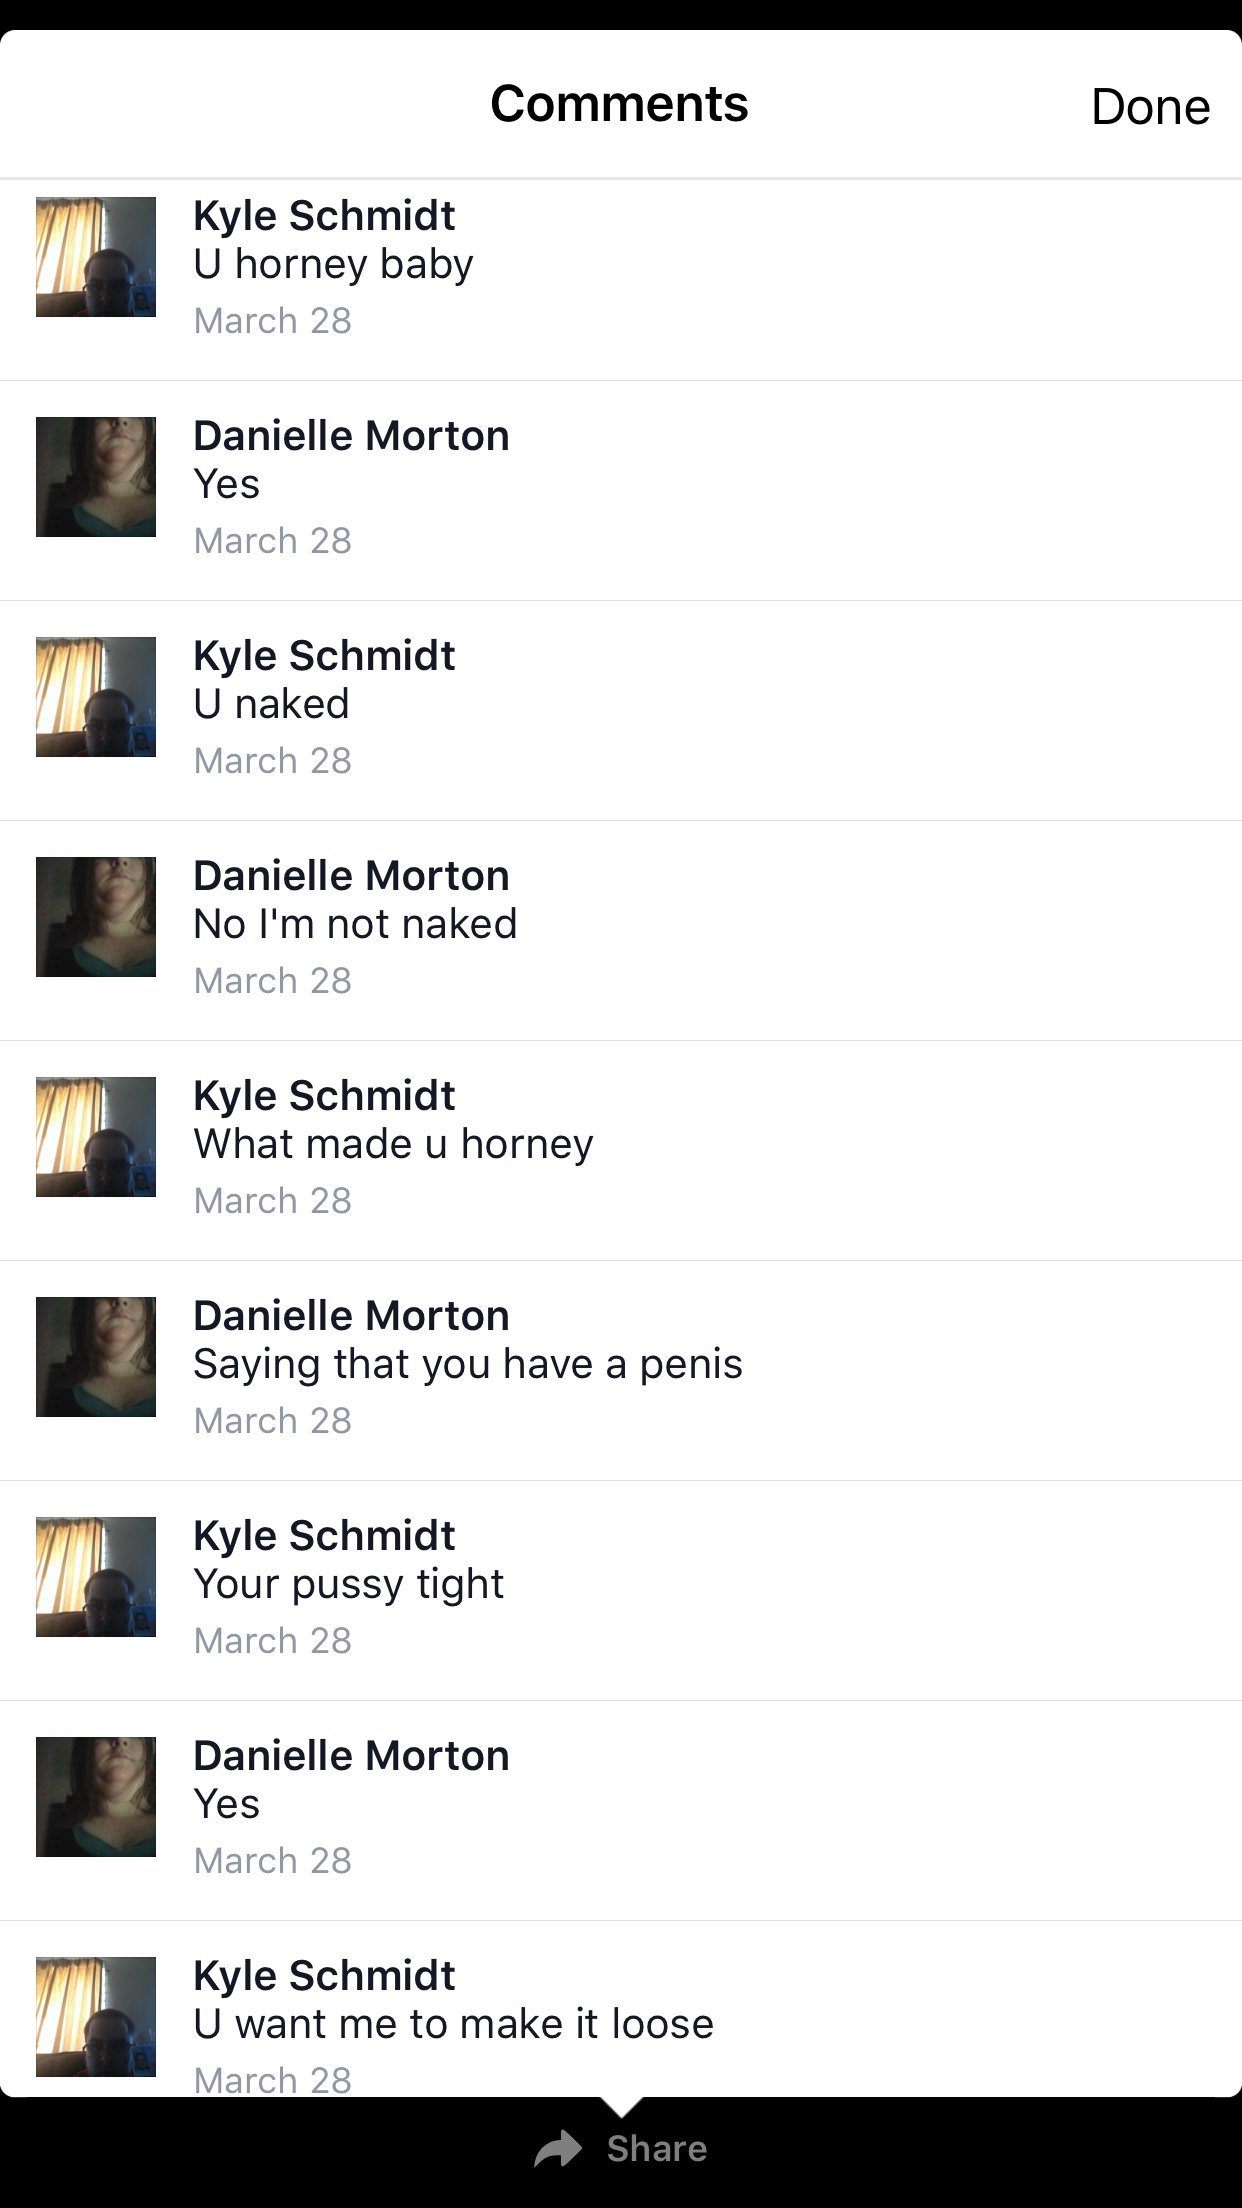 sexting facebook users - Done Kyle Schmidt U horney baby March 28 Danielle Morton Yes March 29 Kyle Schmidt U naked March 28 Danielle Morton No I'm not naked March 28 Kyle Schmidt What made u horney March 28 Danielle Morton Saying that you have a penis Ma